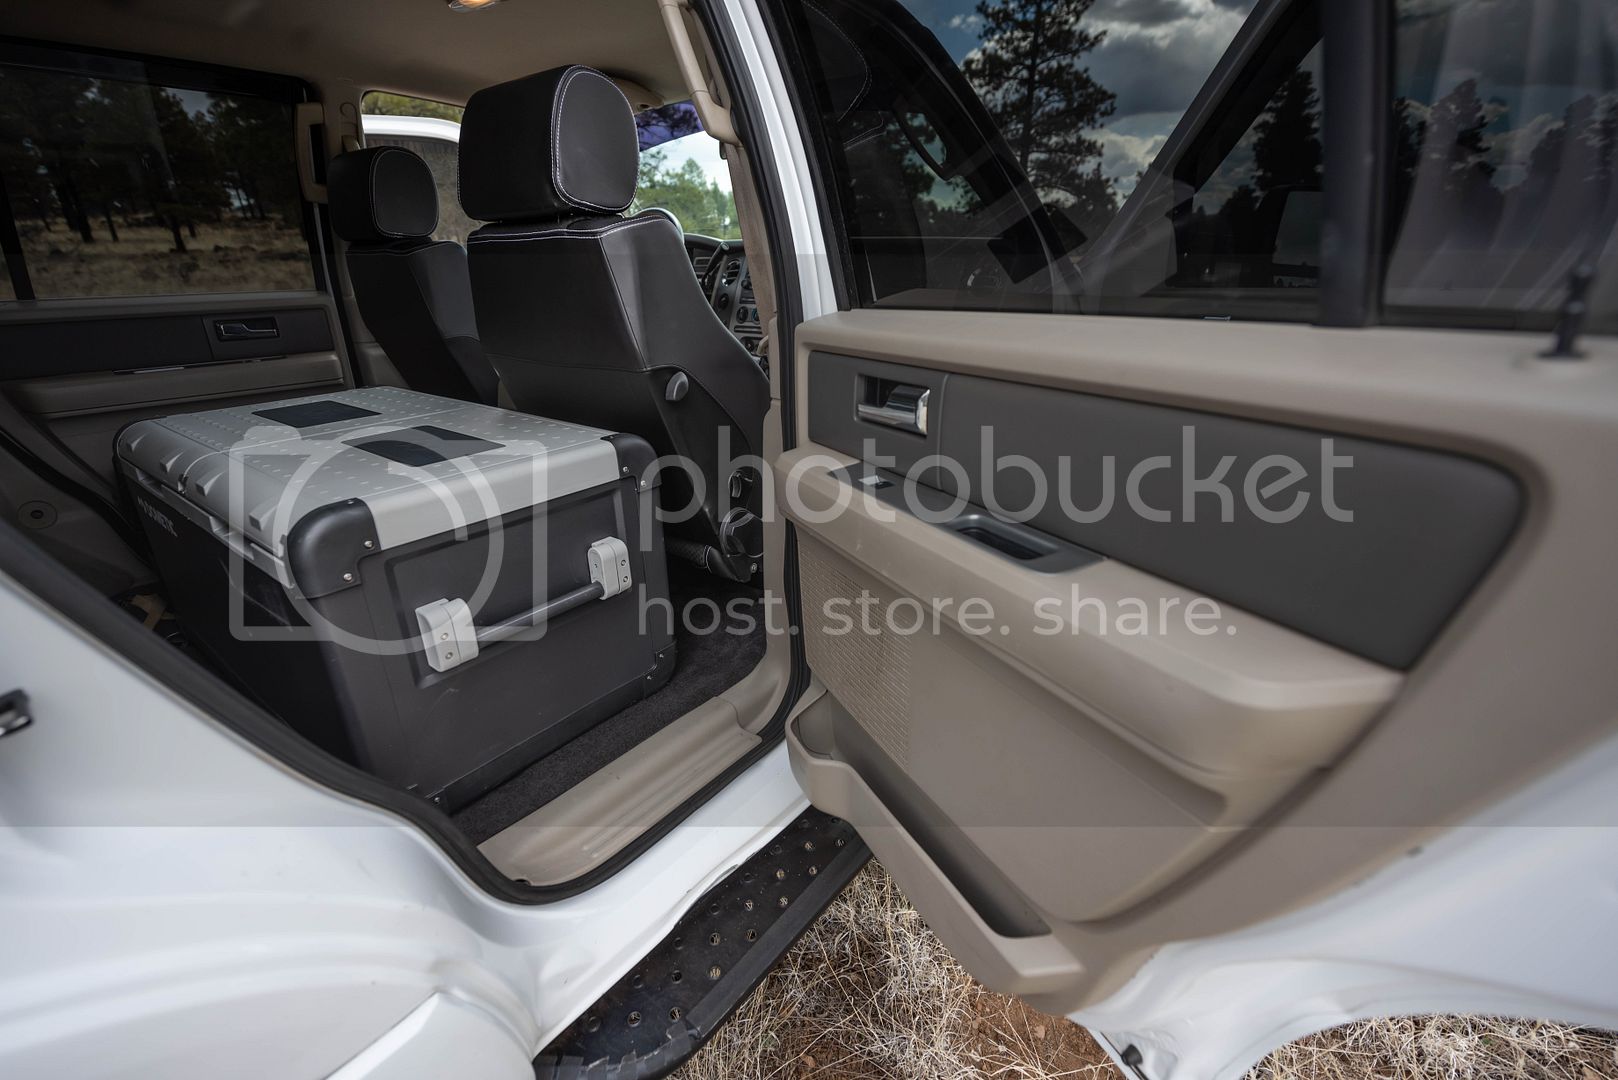 Adventure%20Driven%20Ford%20Expedition%20Aspen-4556_zpswx0gpcw1.jpg